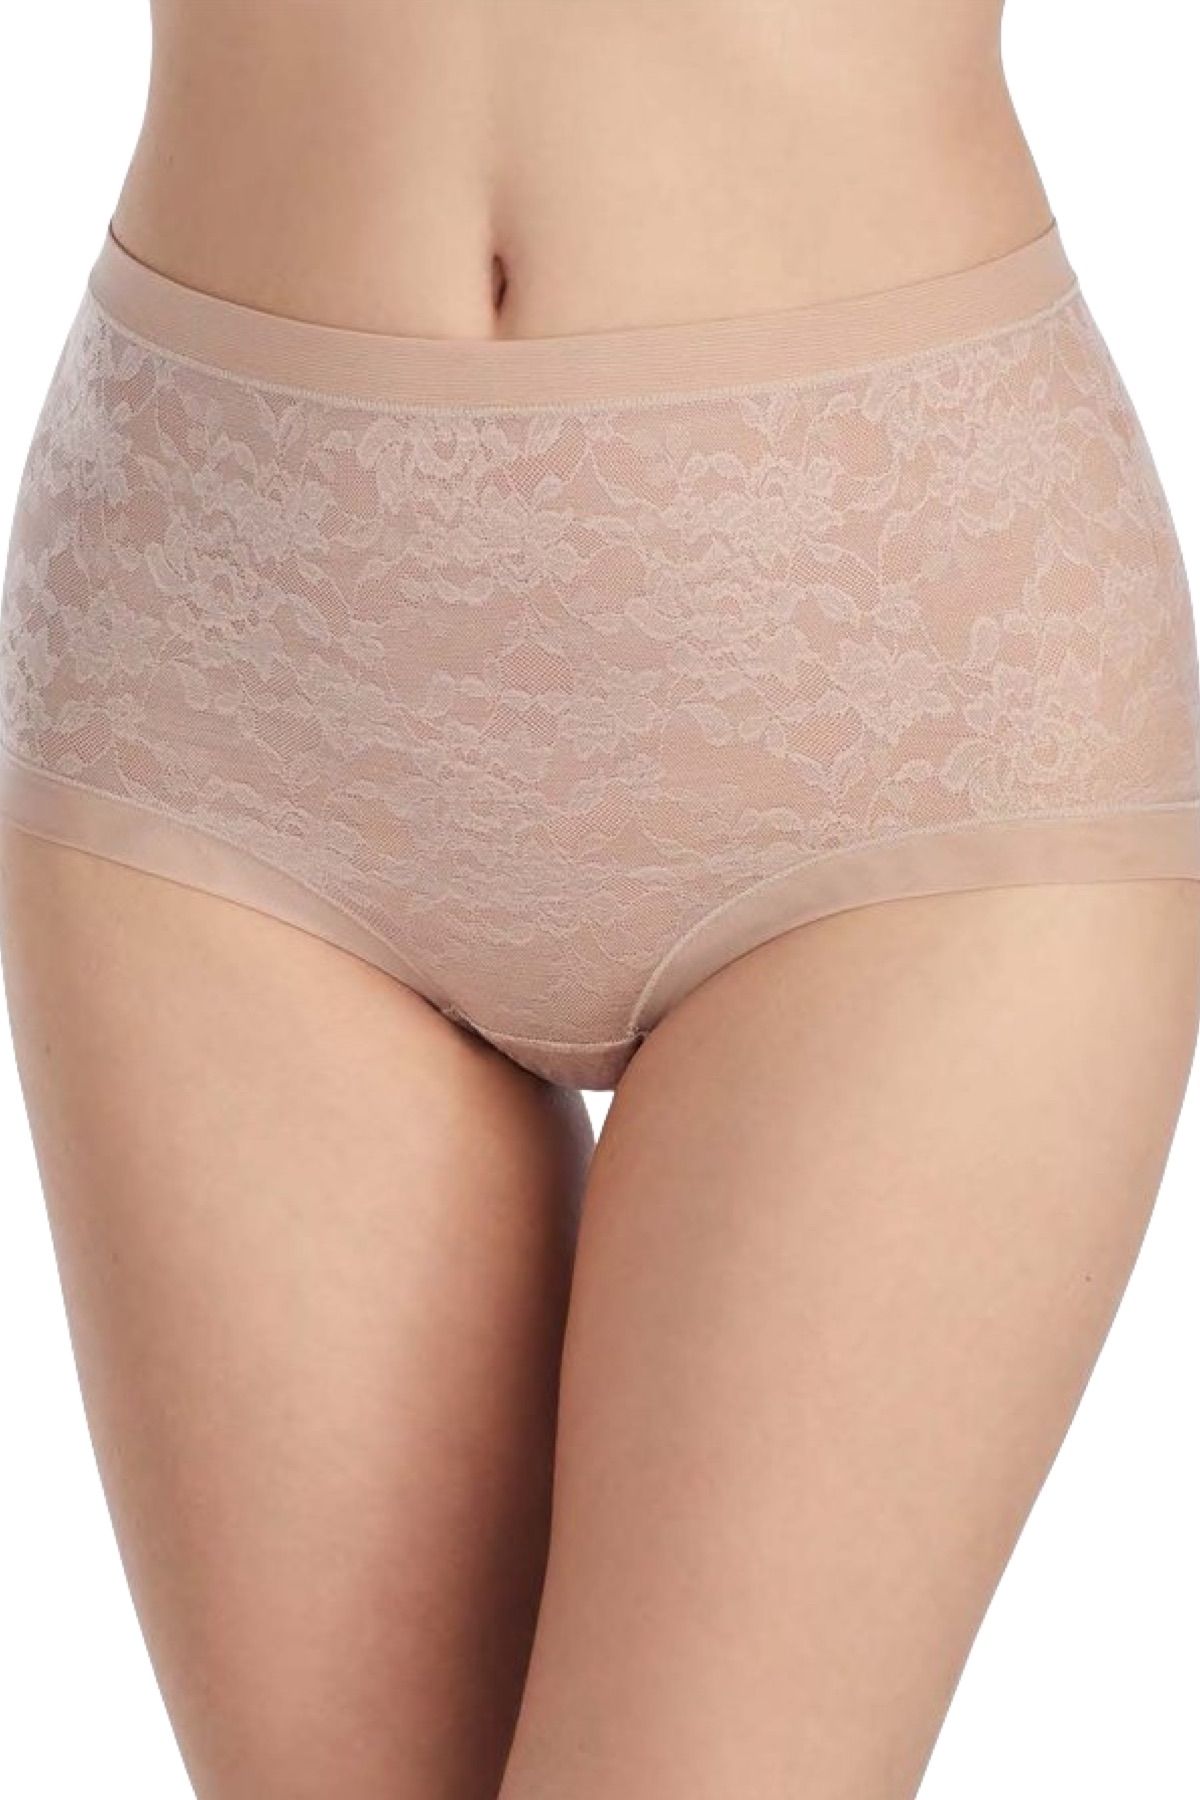 Le Mystere Natural Lace Perfection Brief